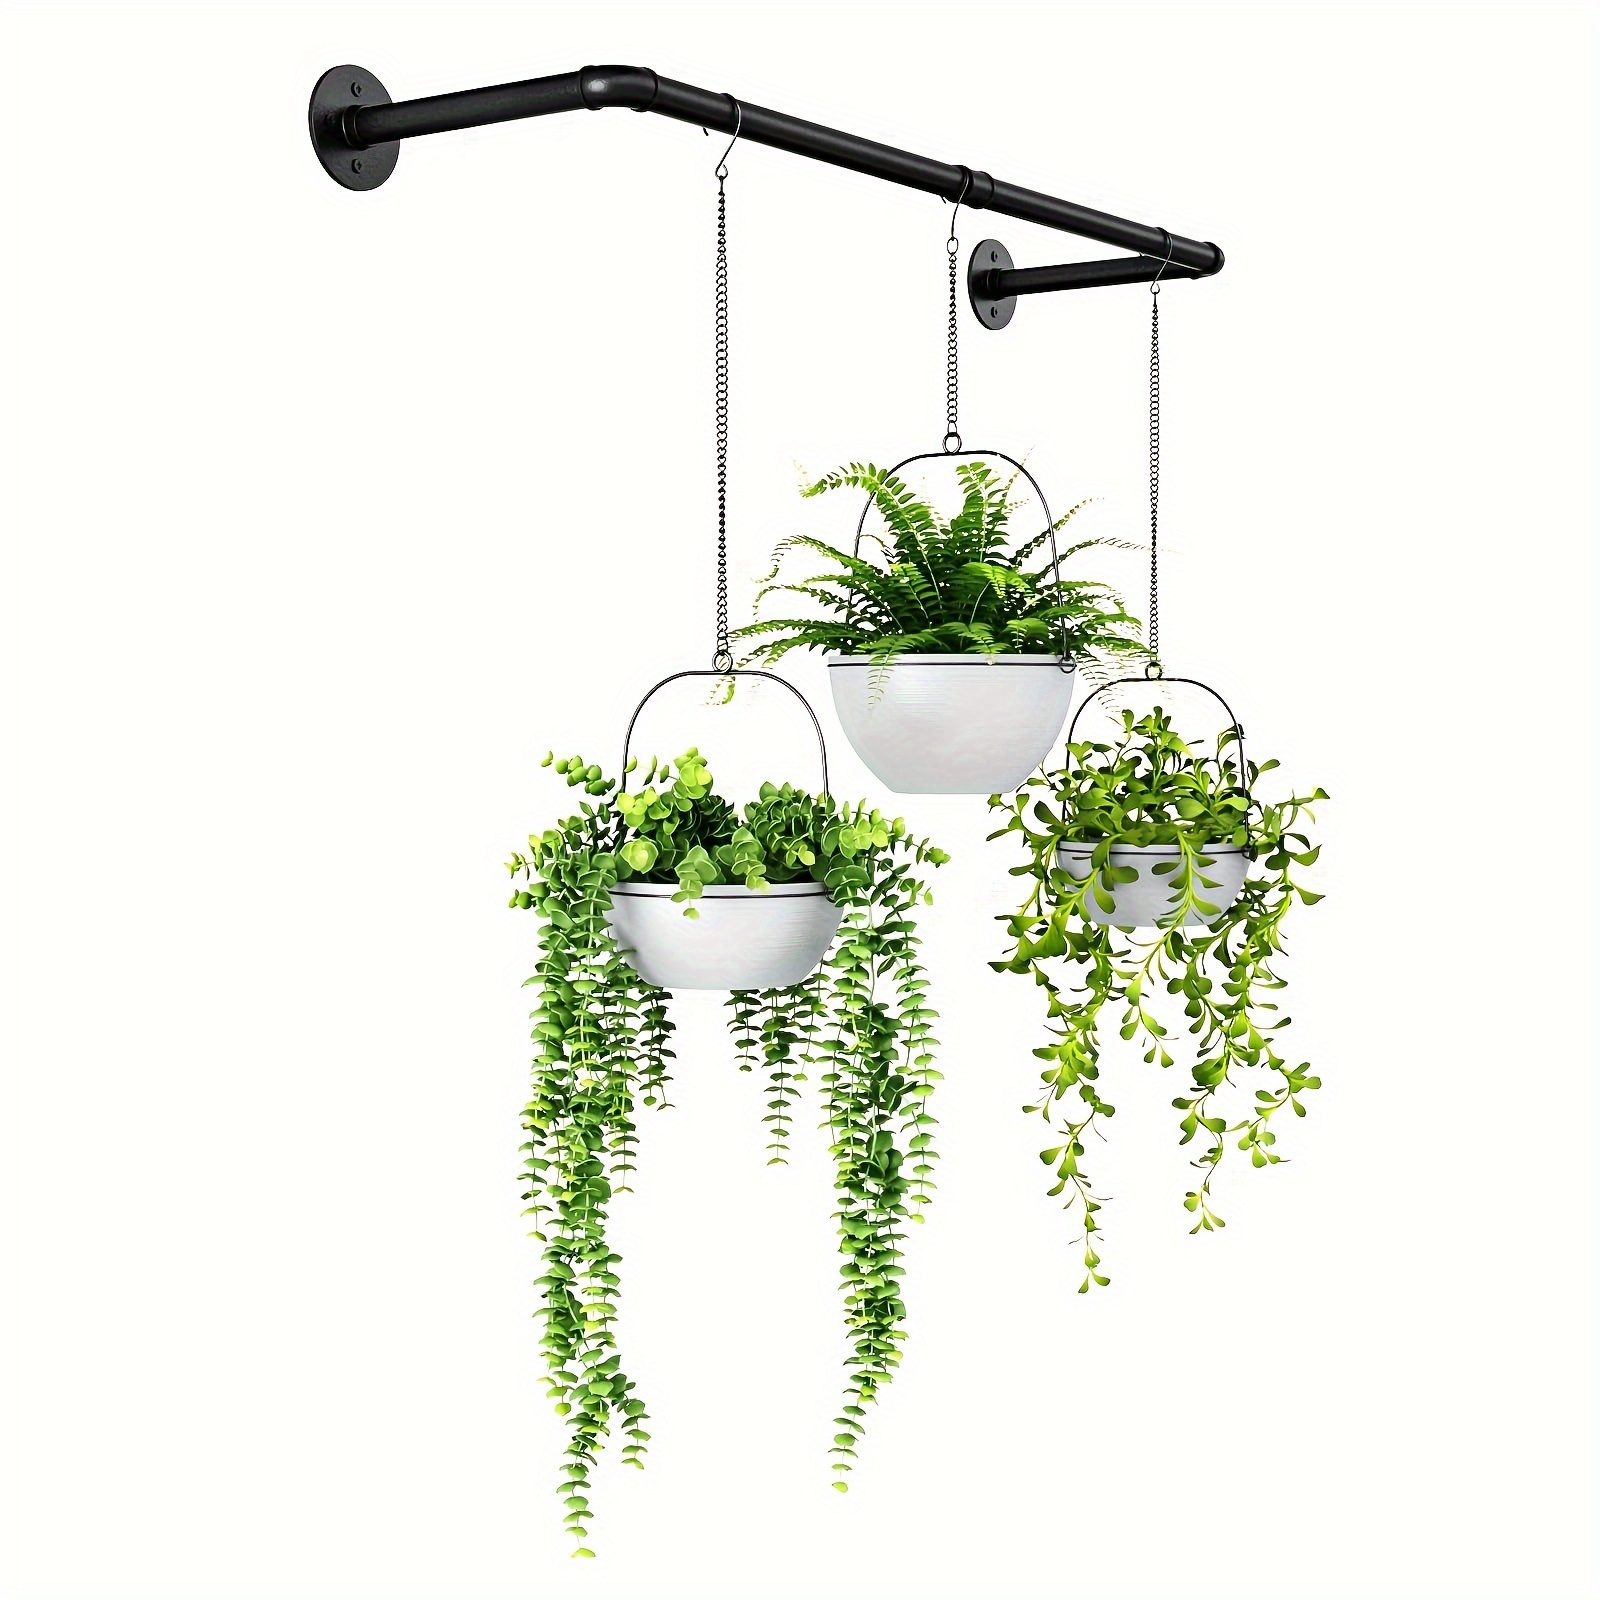 2 4 6pcs 2 5 Inch Hanging Plant Ceiling Hooks Wall Mounted Hanger